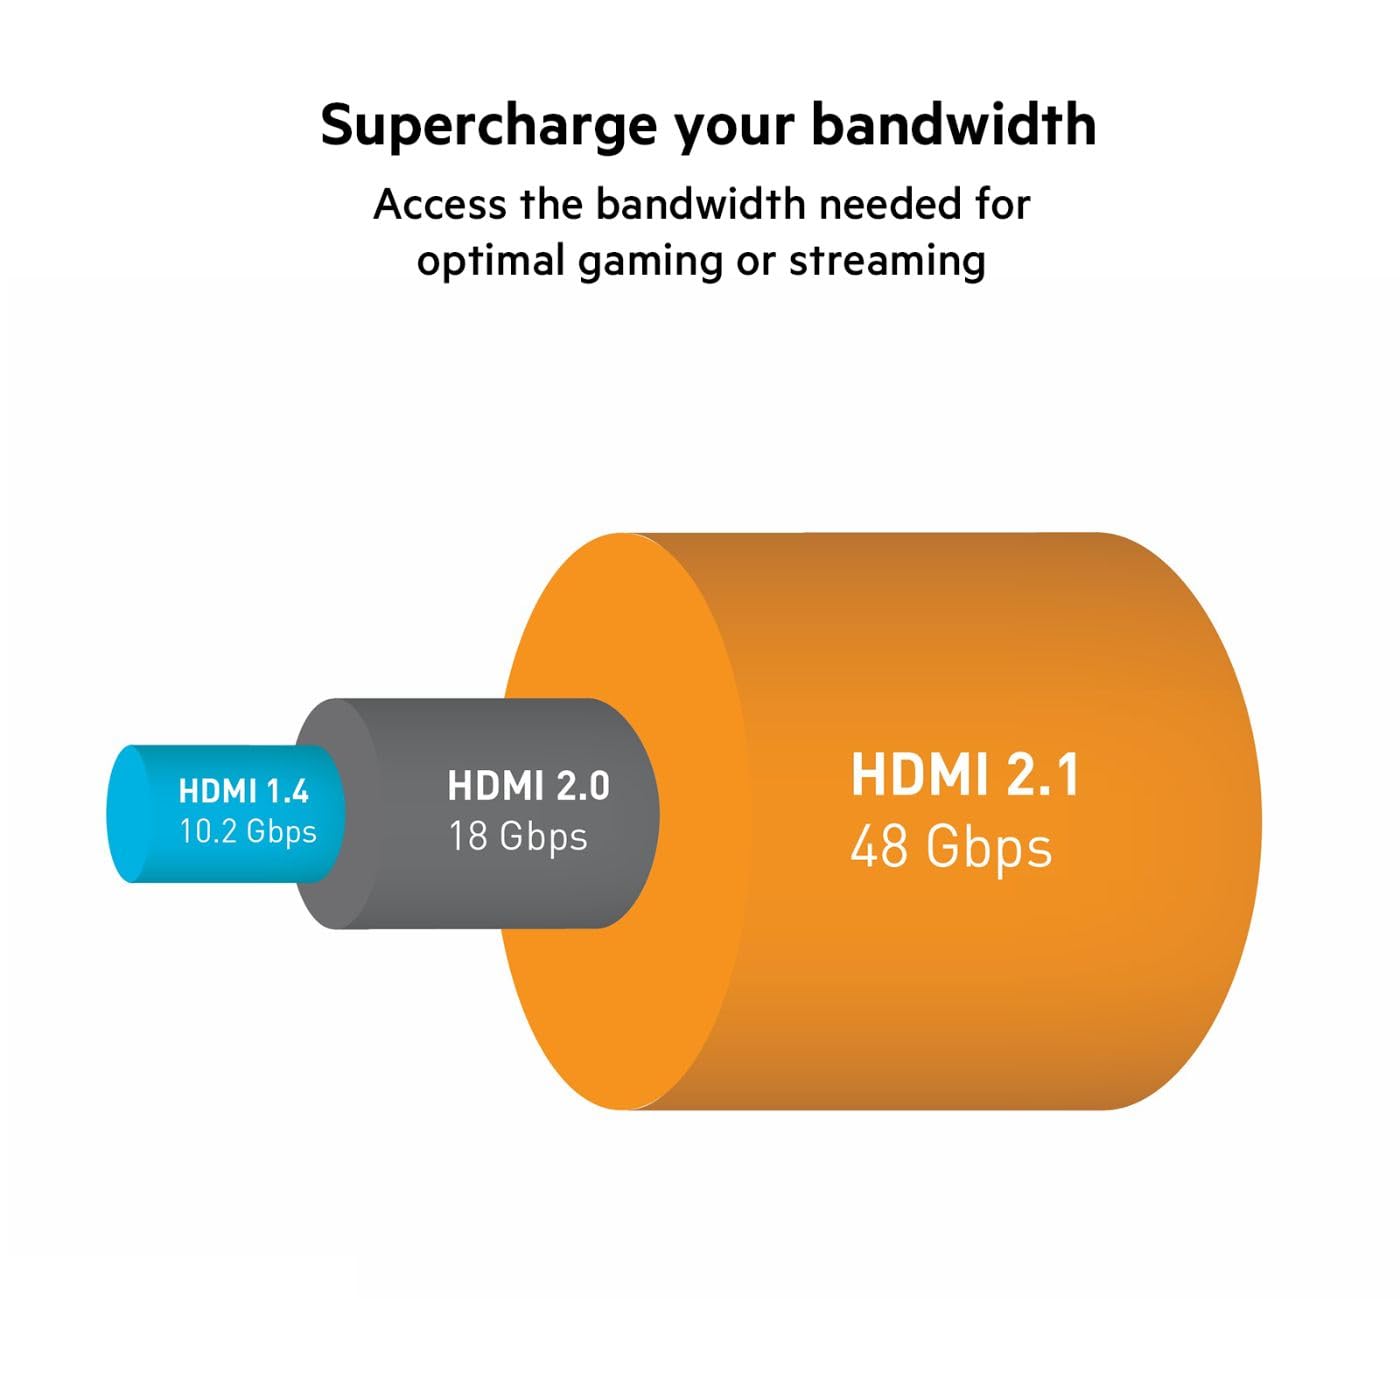 Belkin Ultra HD HDMI 2.1 Cable 6.6FT/2M, 4K Ultra High Speed HDMI Cable, 48Gbps HDMI 2.1 Cord, Dolby Vision HDR & 8K @60Hz, 10K Streaming - Compatible w/ Playstation, PS4, PS5, Xbox Series X, & More